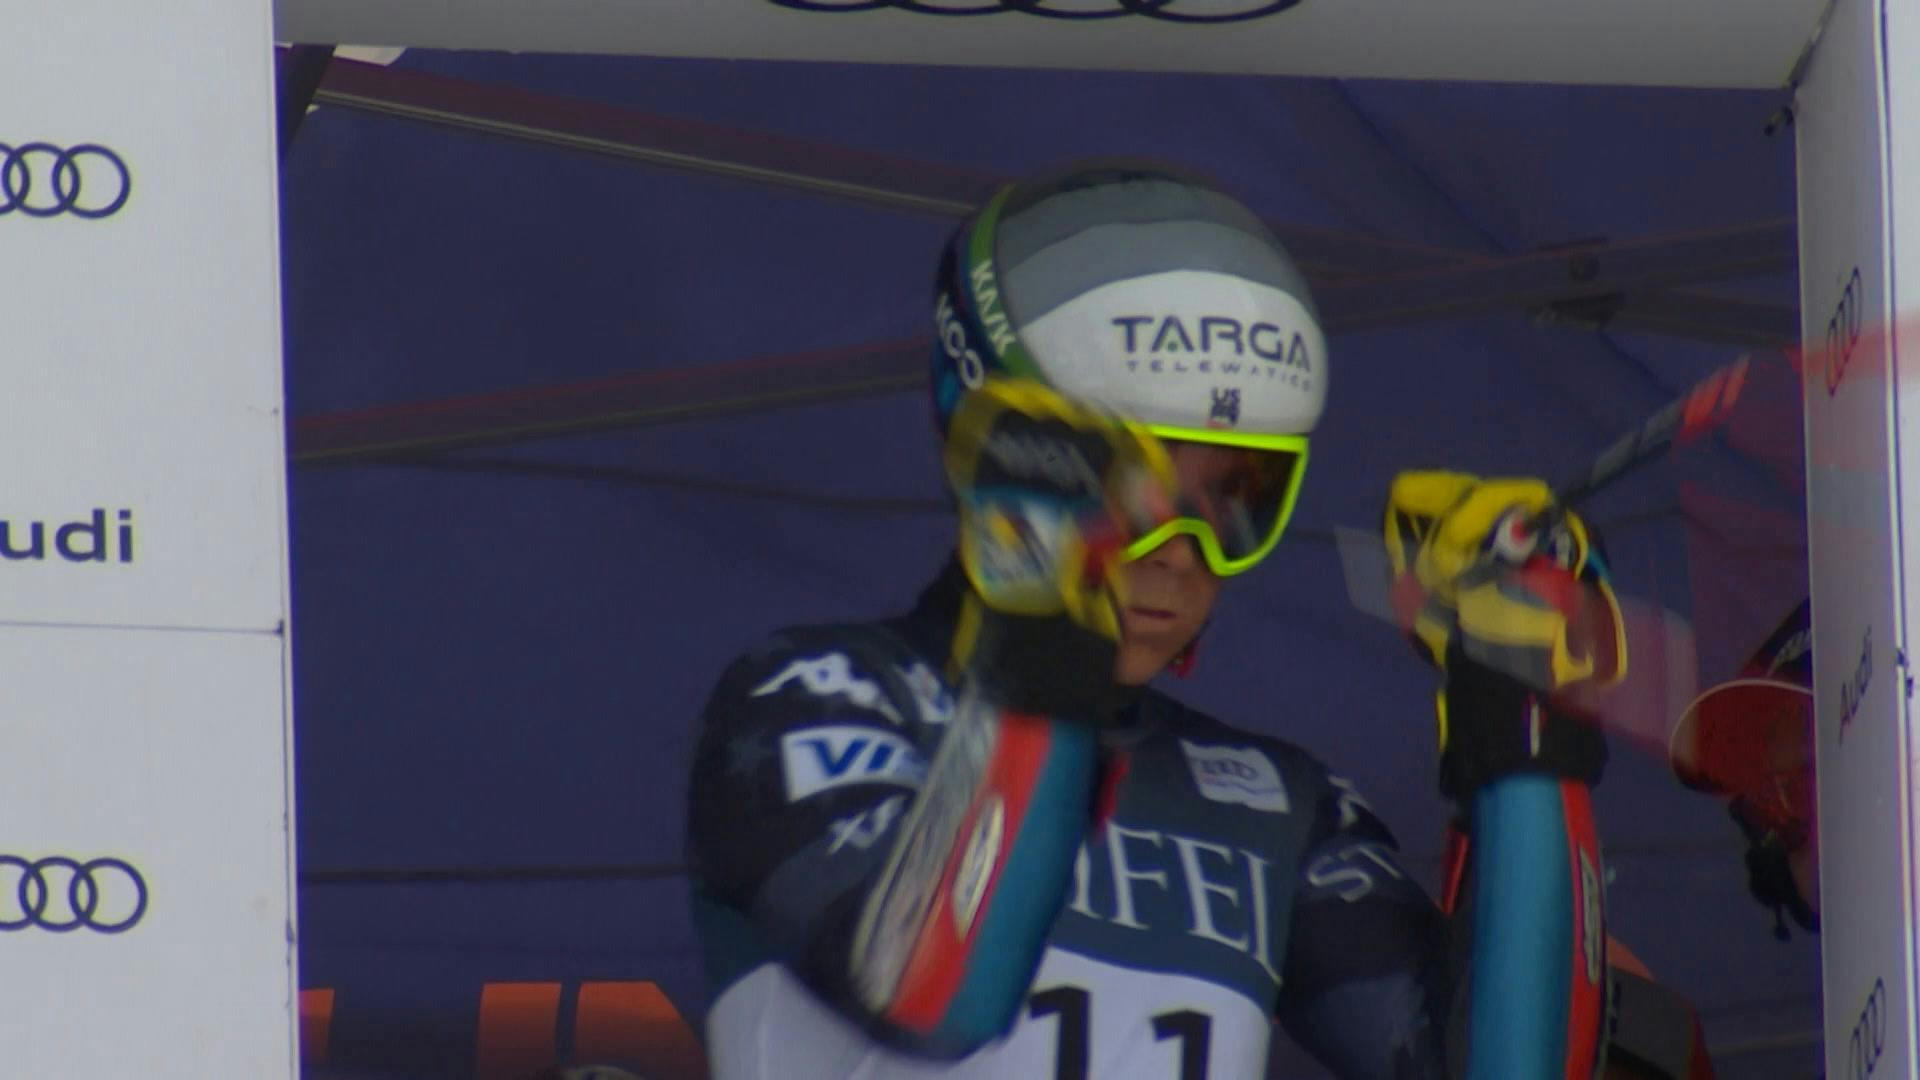 Stifel Palisades Tahoe World Cup Men's Giant Slalom US Highlights | USSS Event Replays